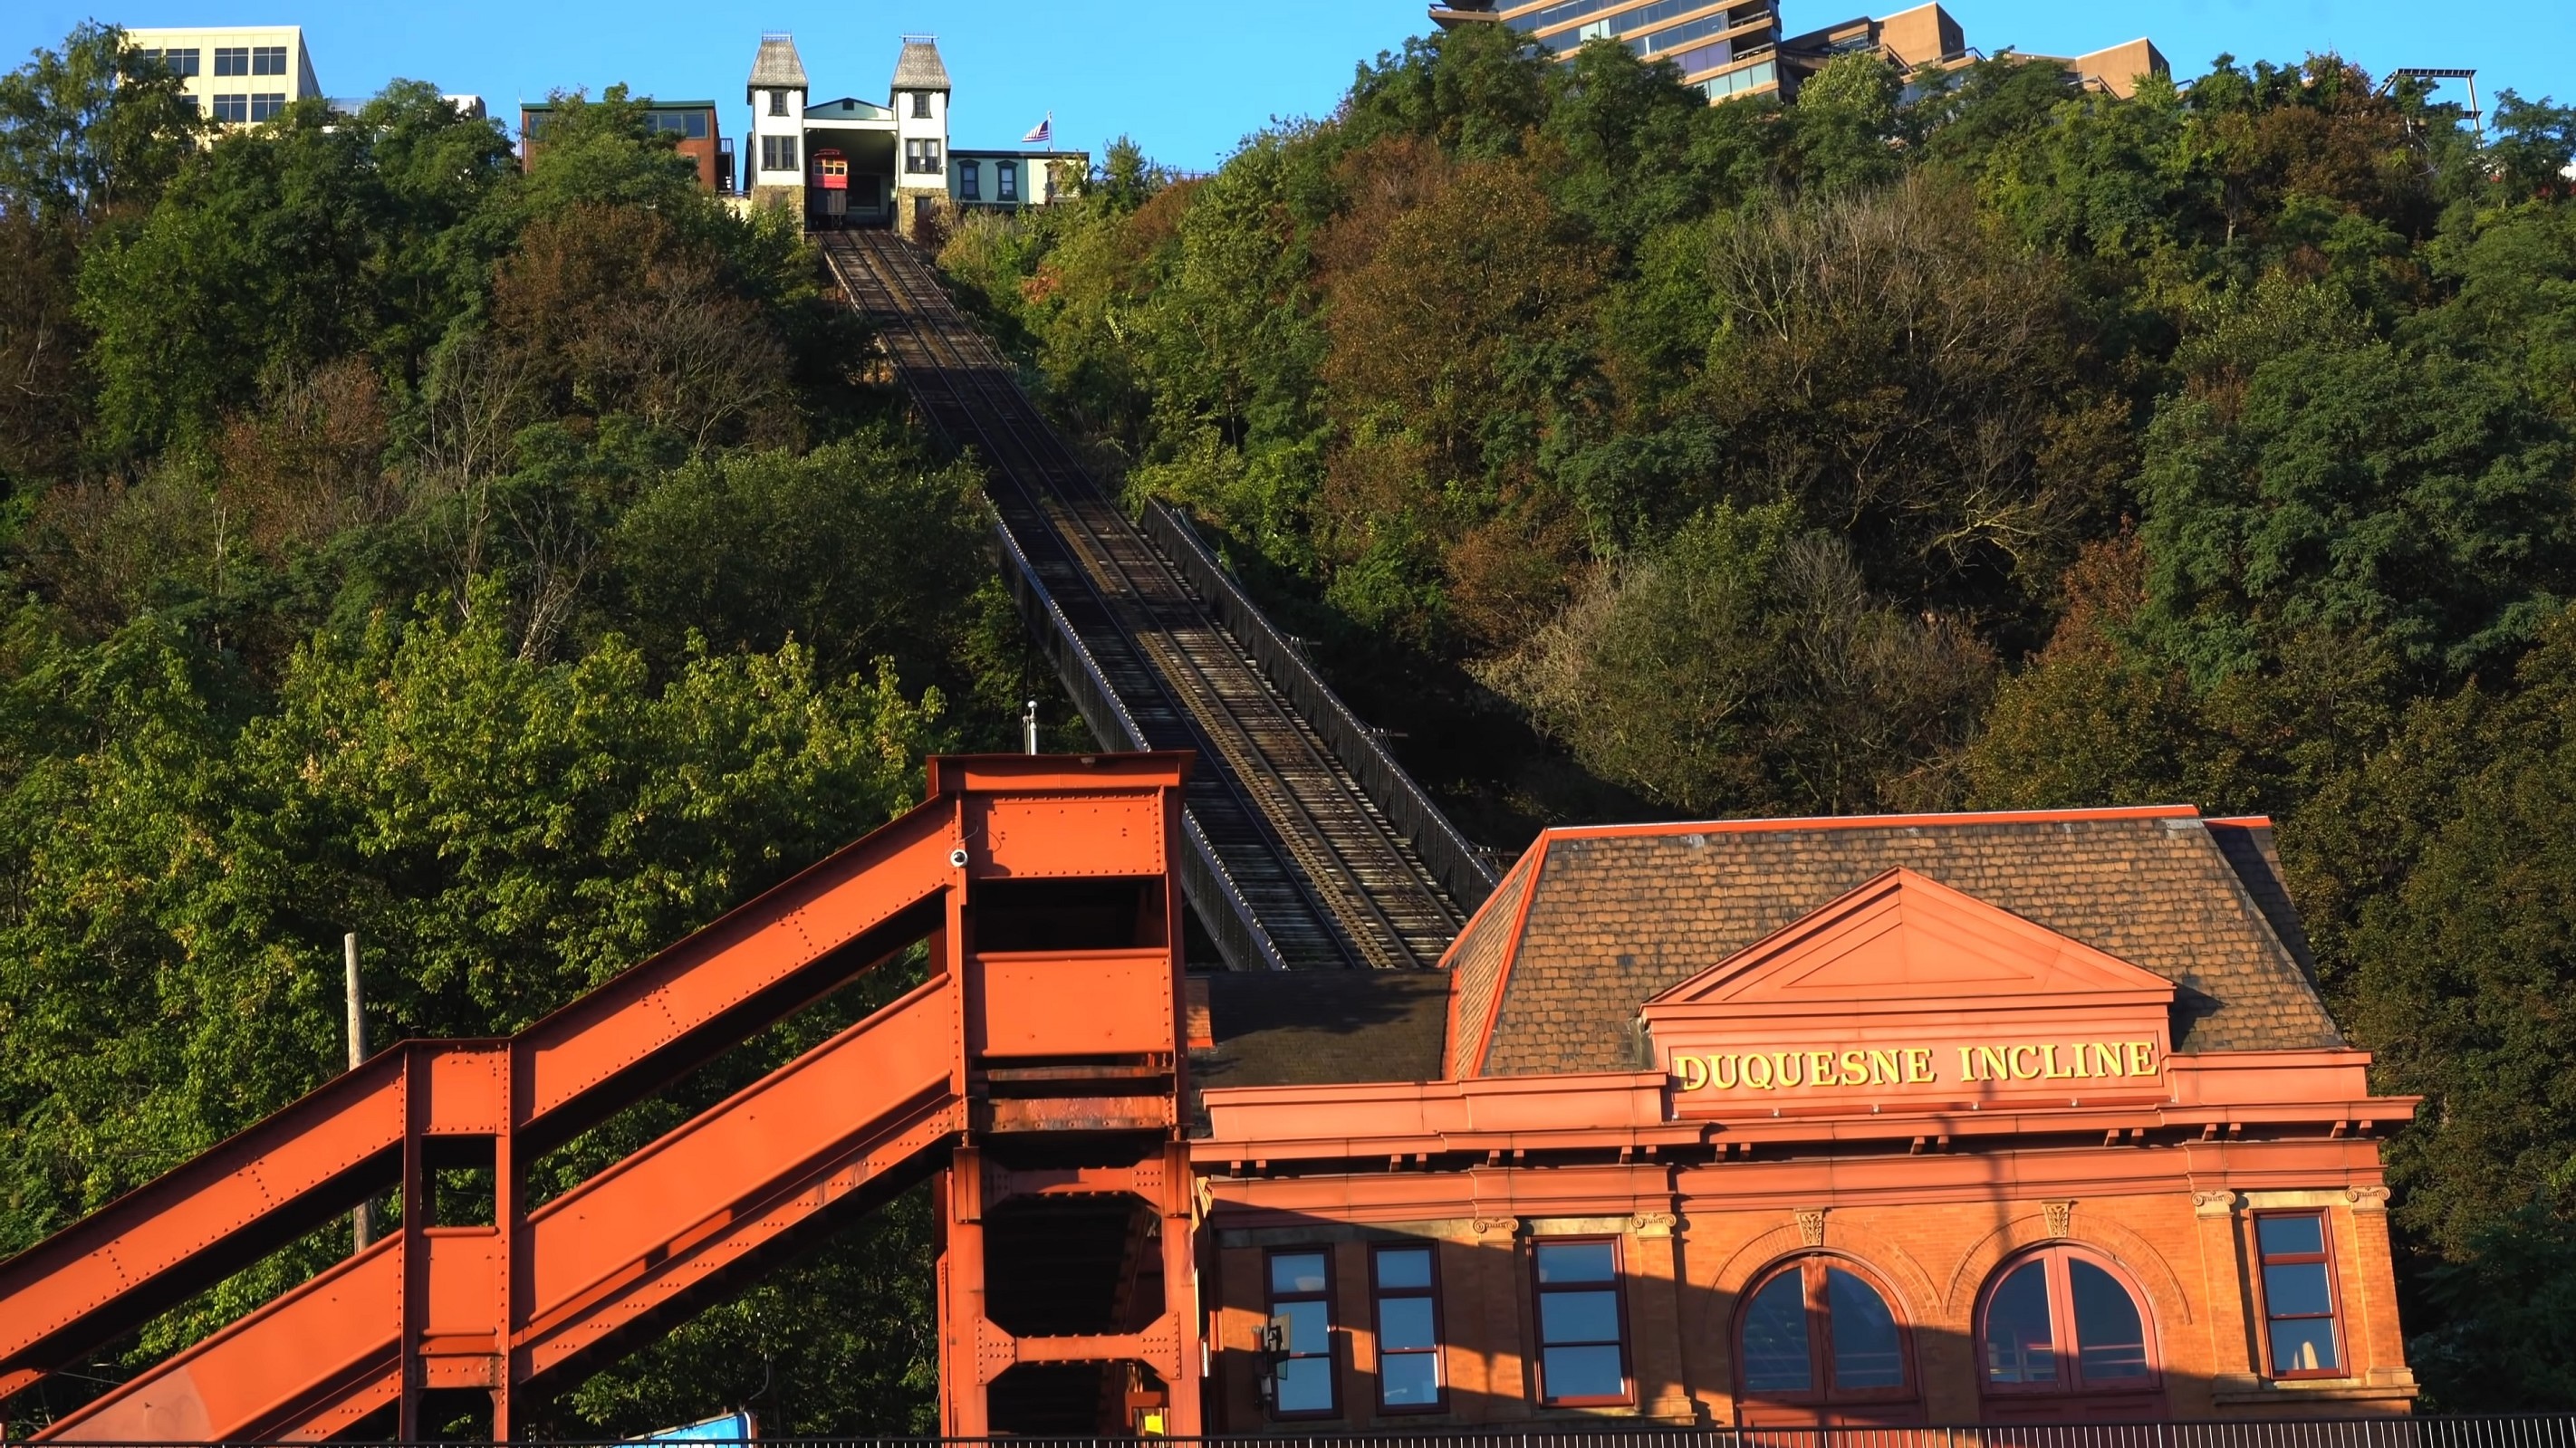 Duquesne Incline is just 7 minutes drive to the northeast of ProLink Staffing Pittsburgh PA